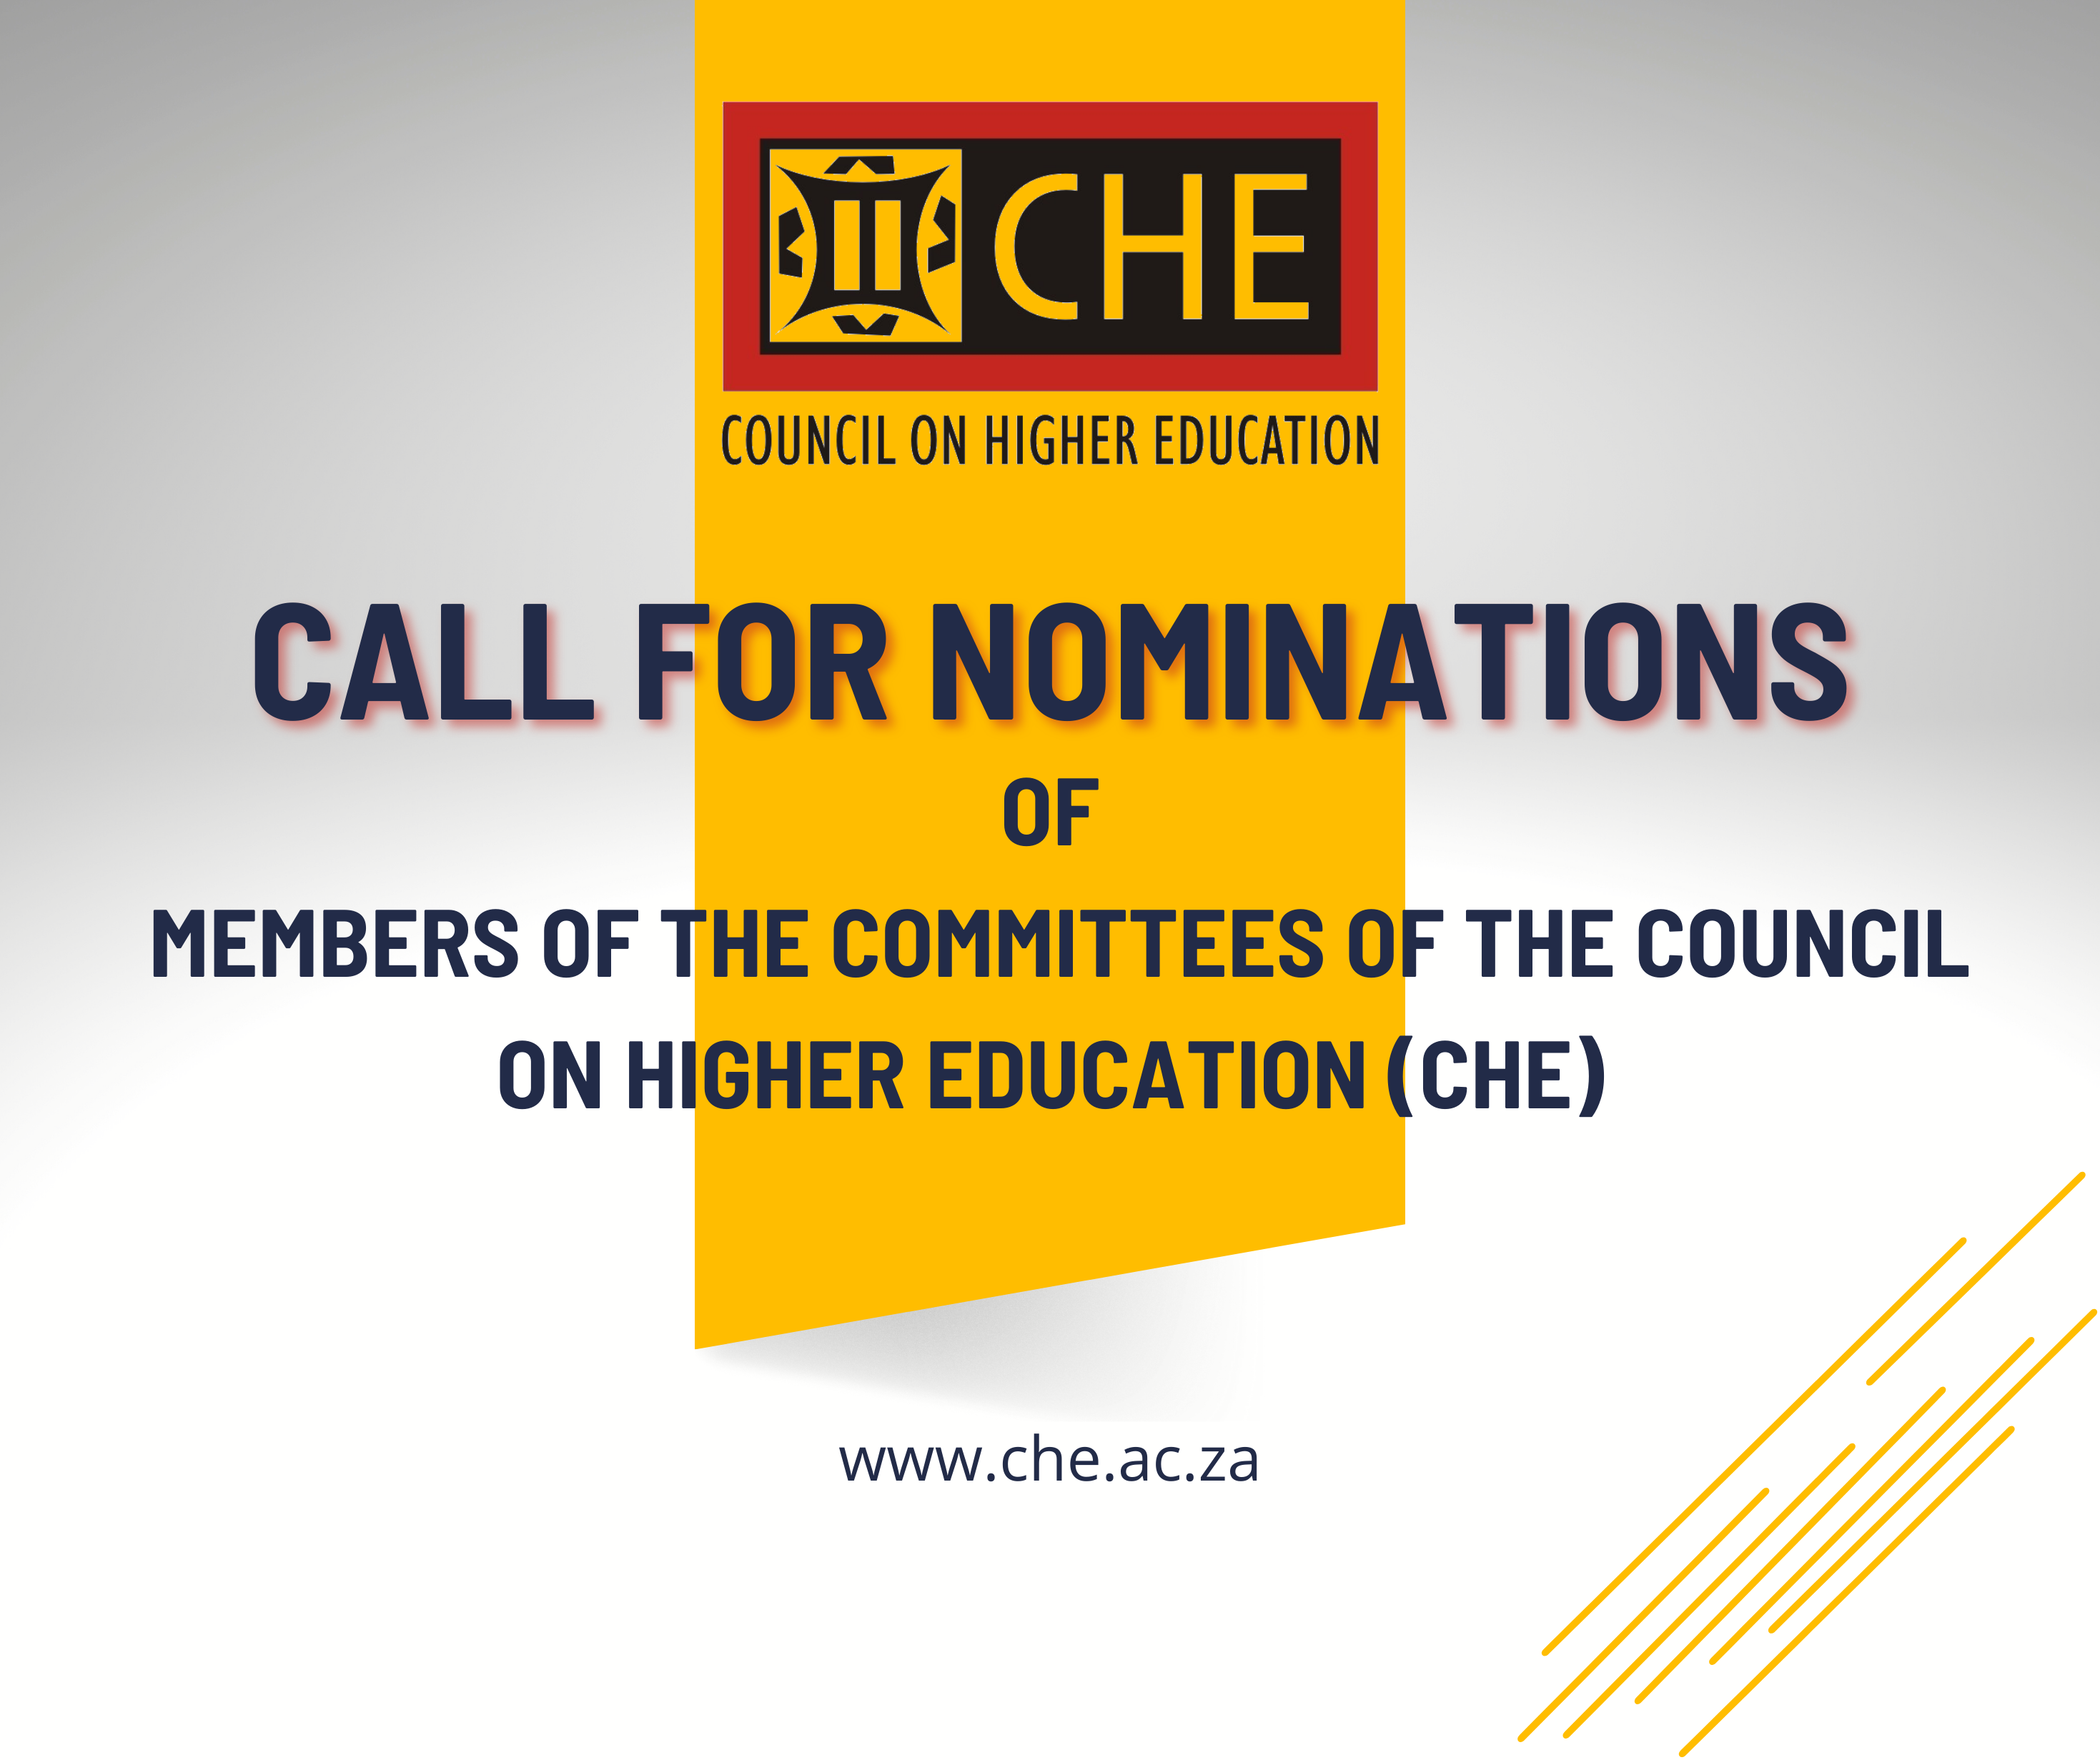 Call for Nomination of Members of the Committees of the Council on Higher Education (CHE)